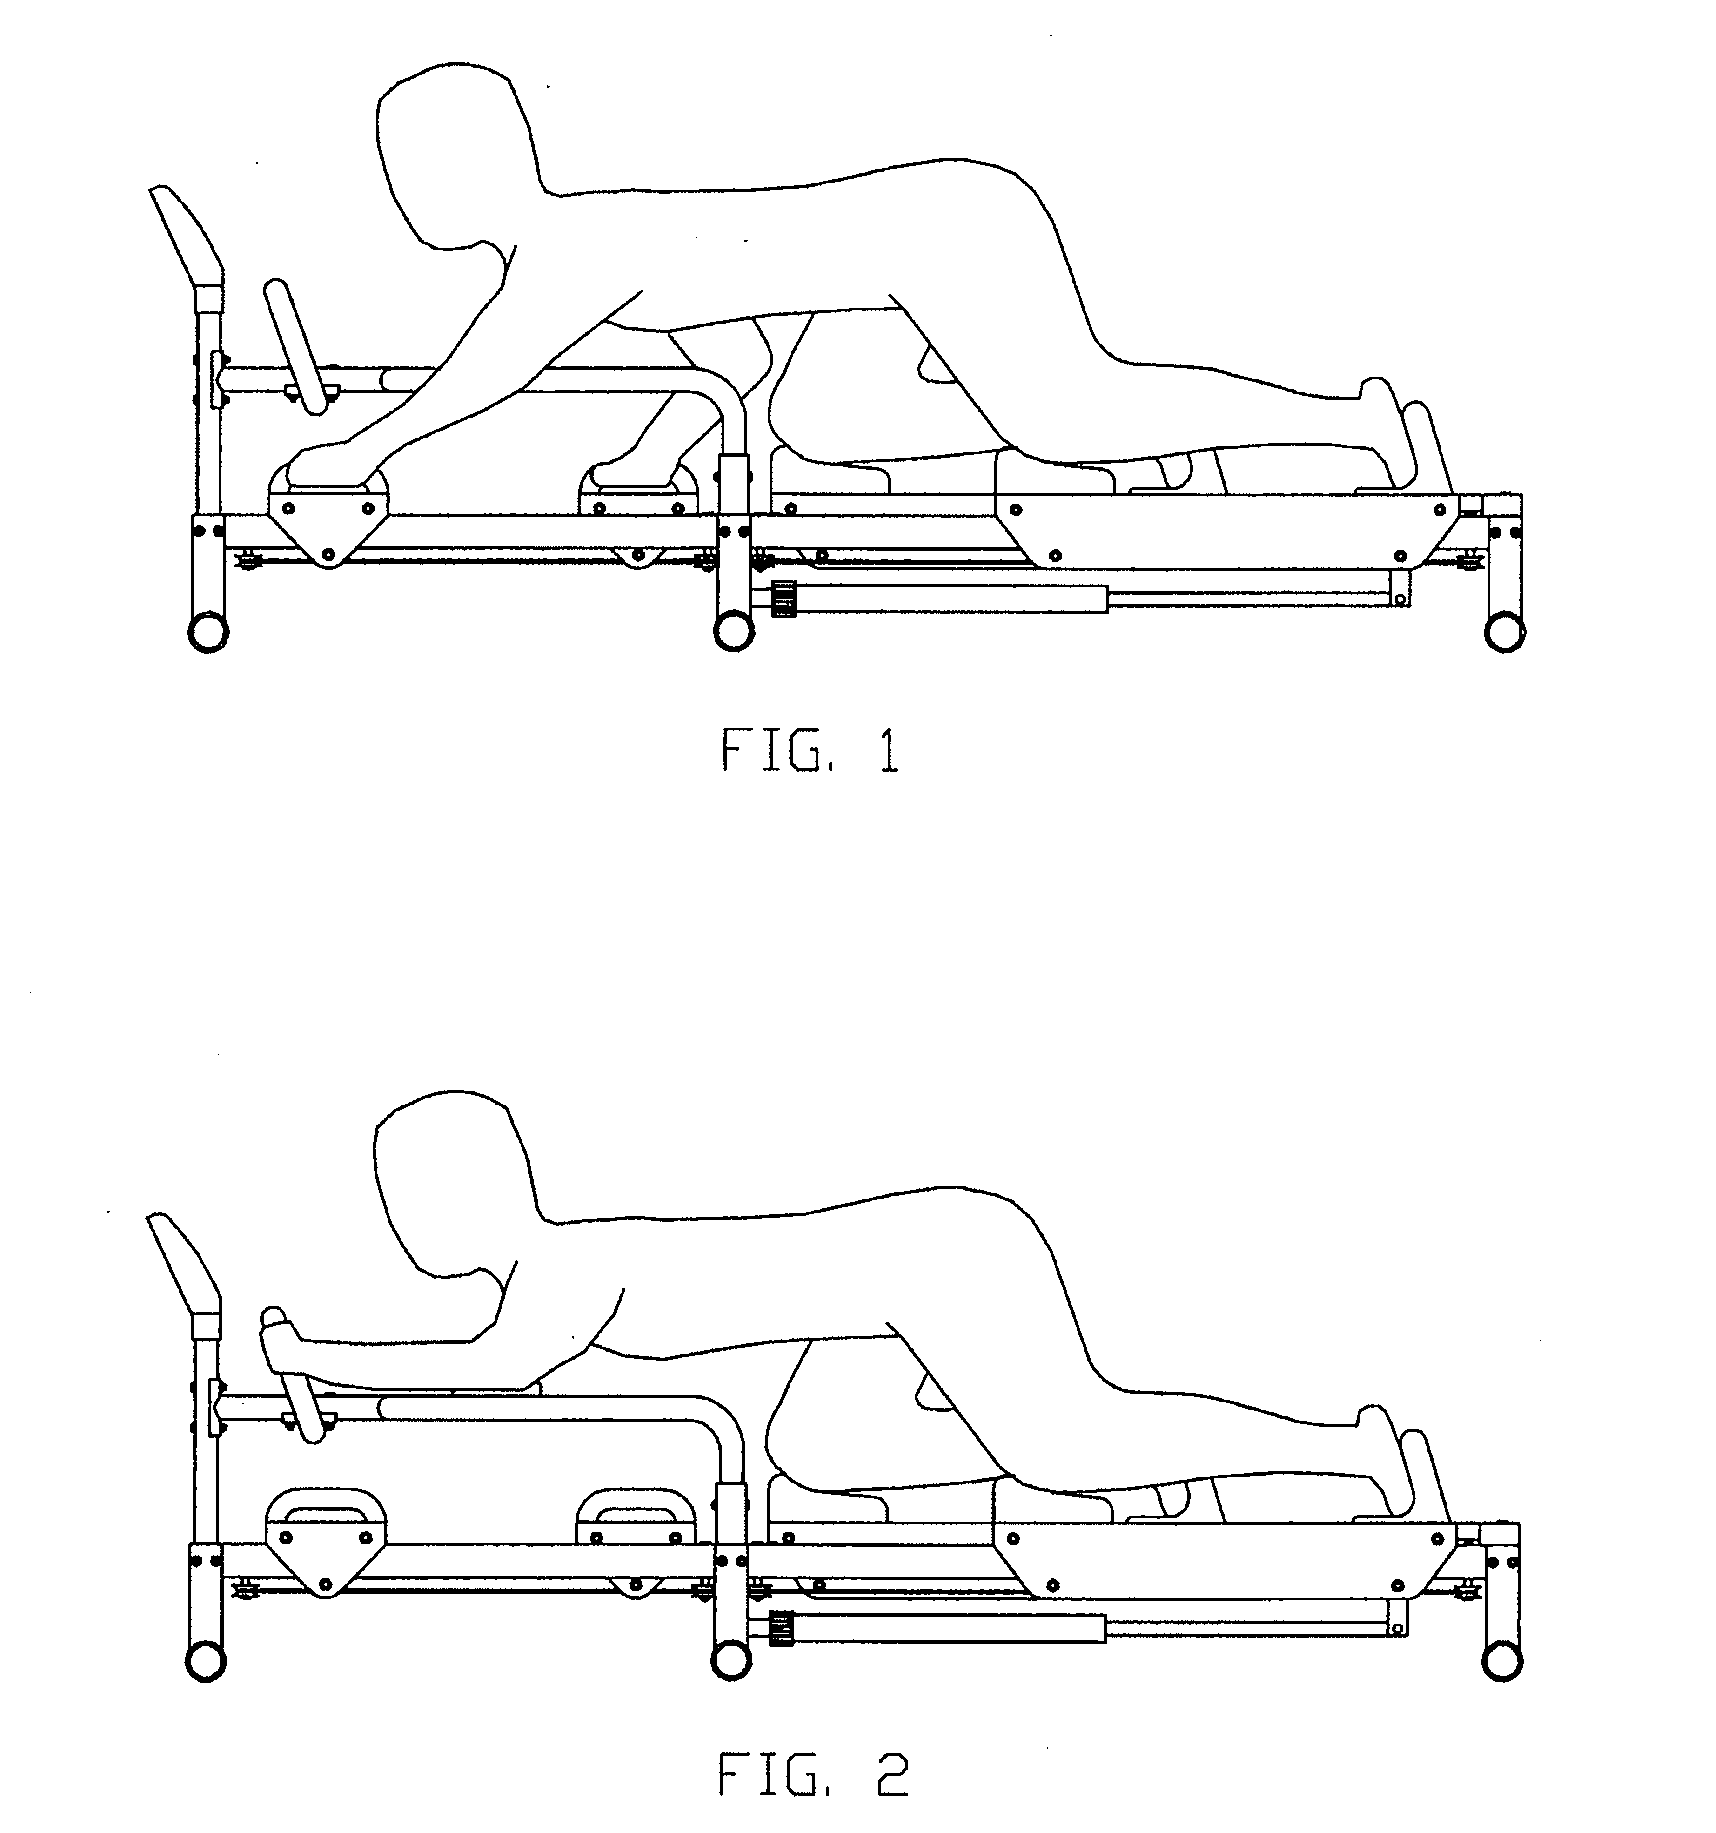 Prostrate grabbling exercise apparatus